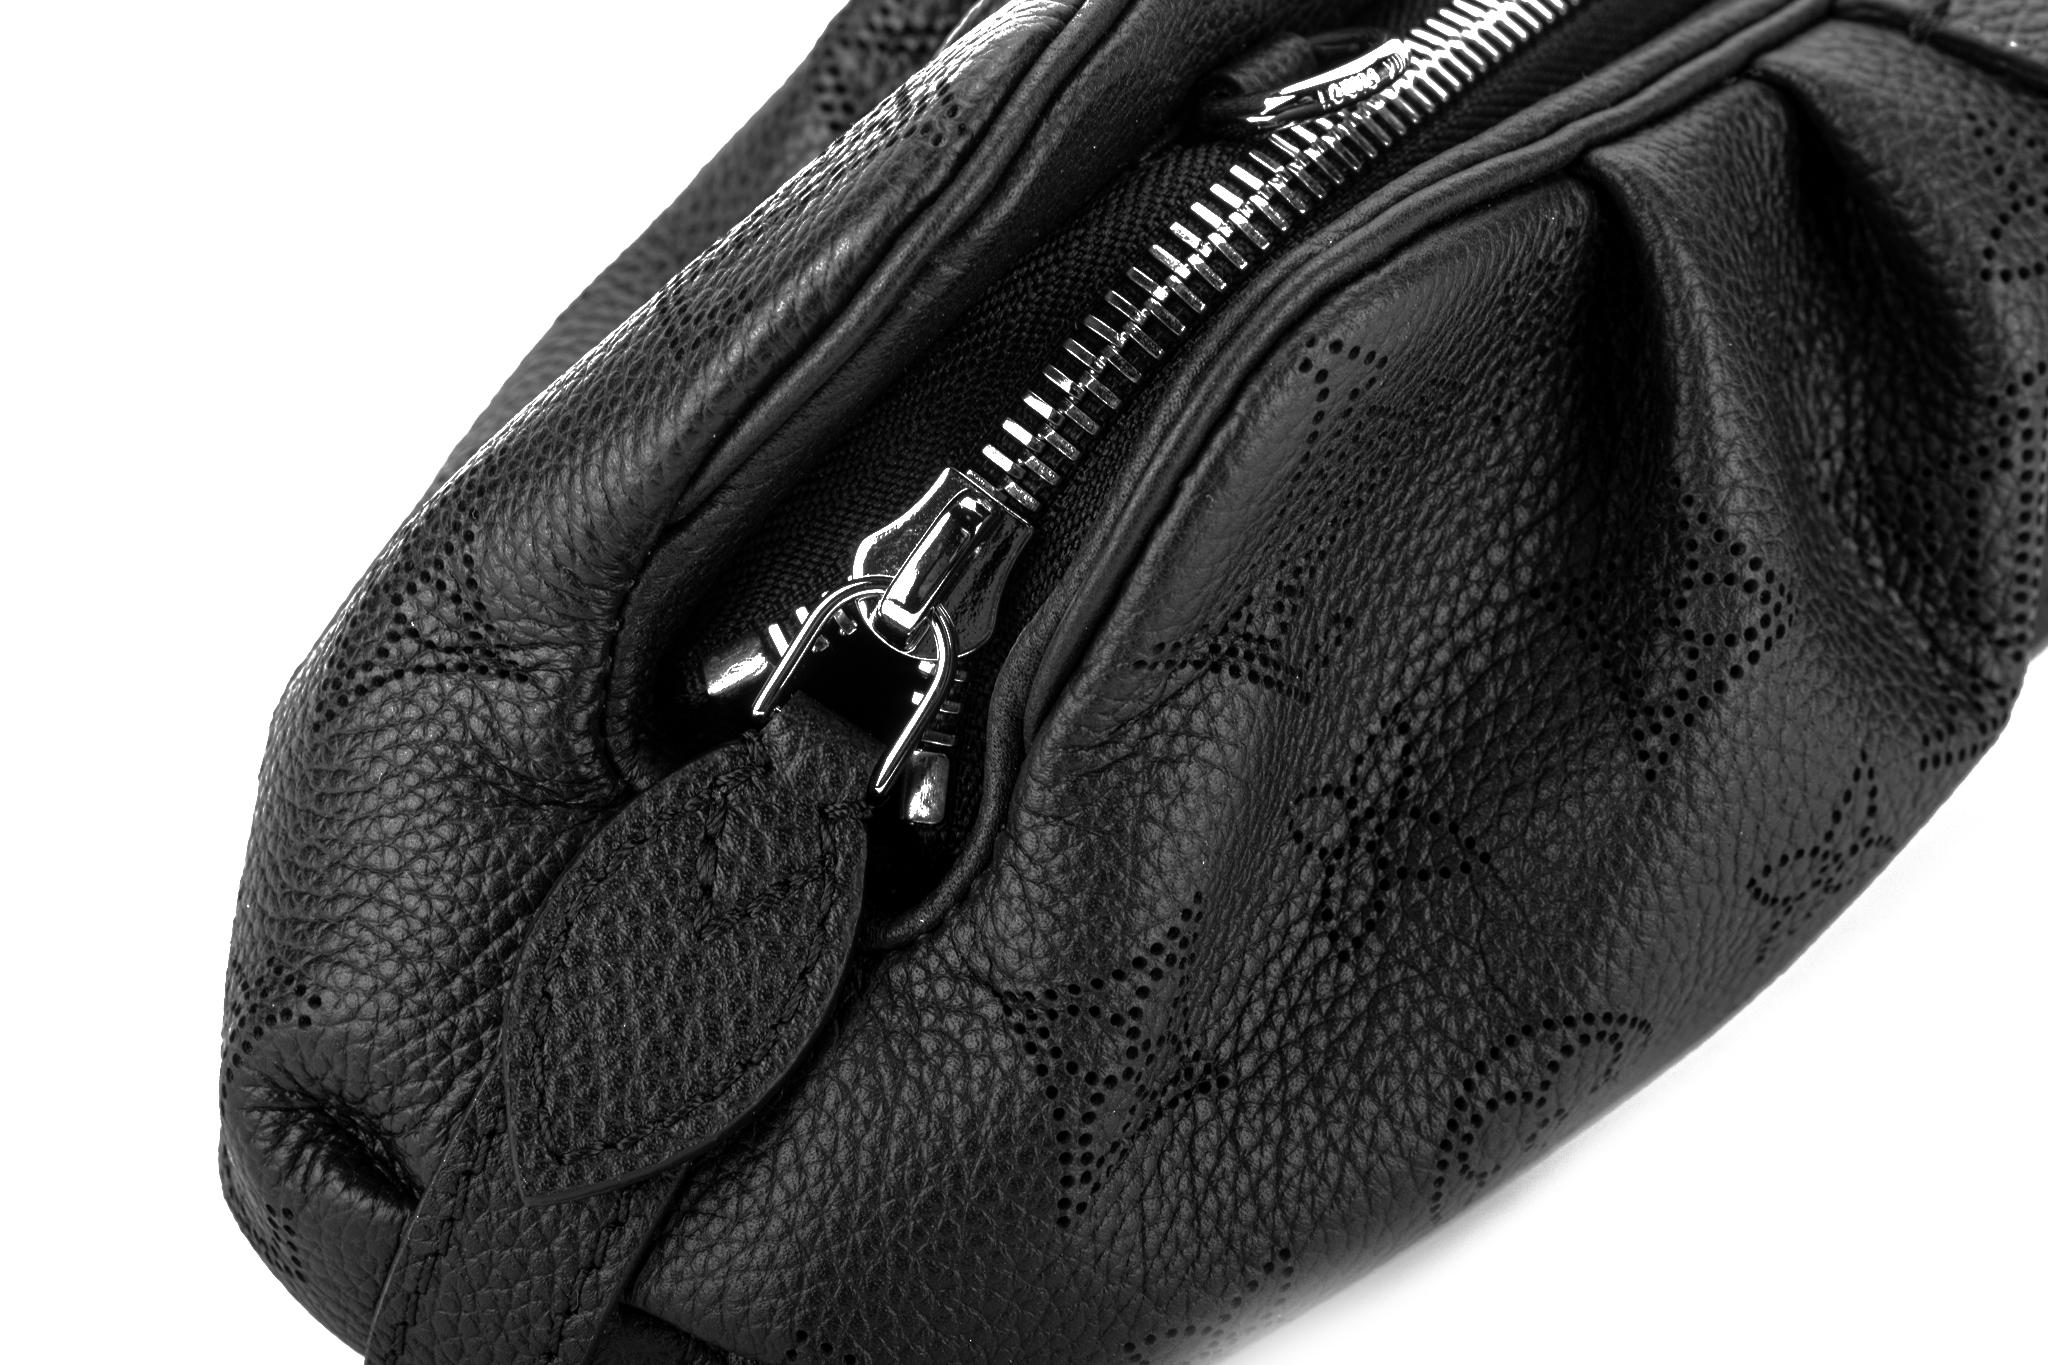 New in Box Louis Vuitton Black 2 Way Perforated Bag 4